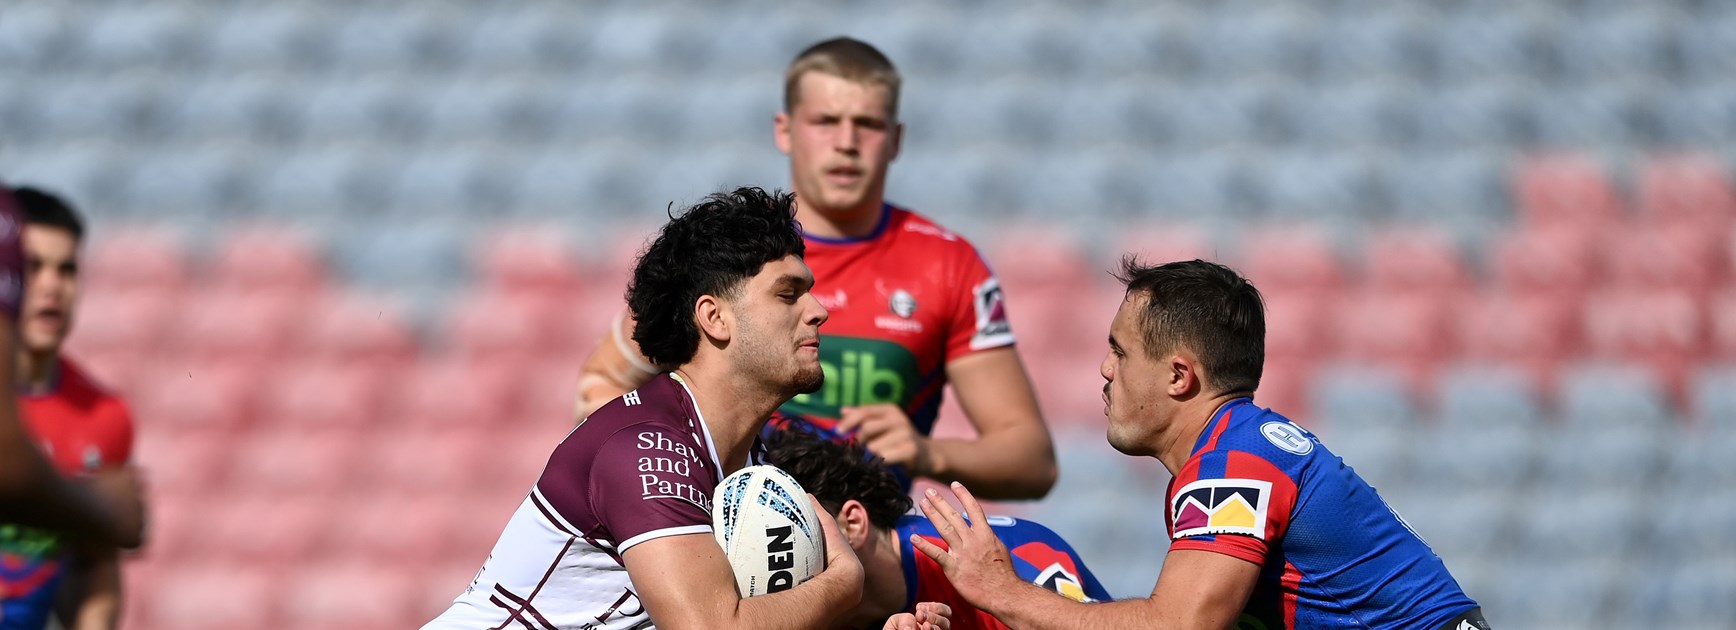 Sea Eagles lose to Knights in fiery Jersey Flegg game